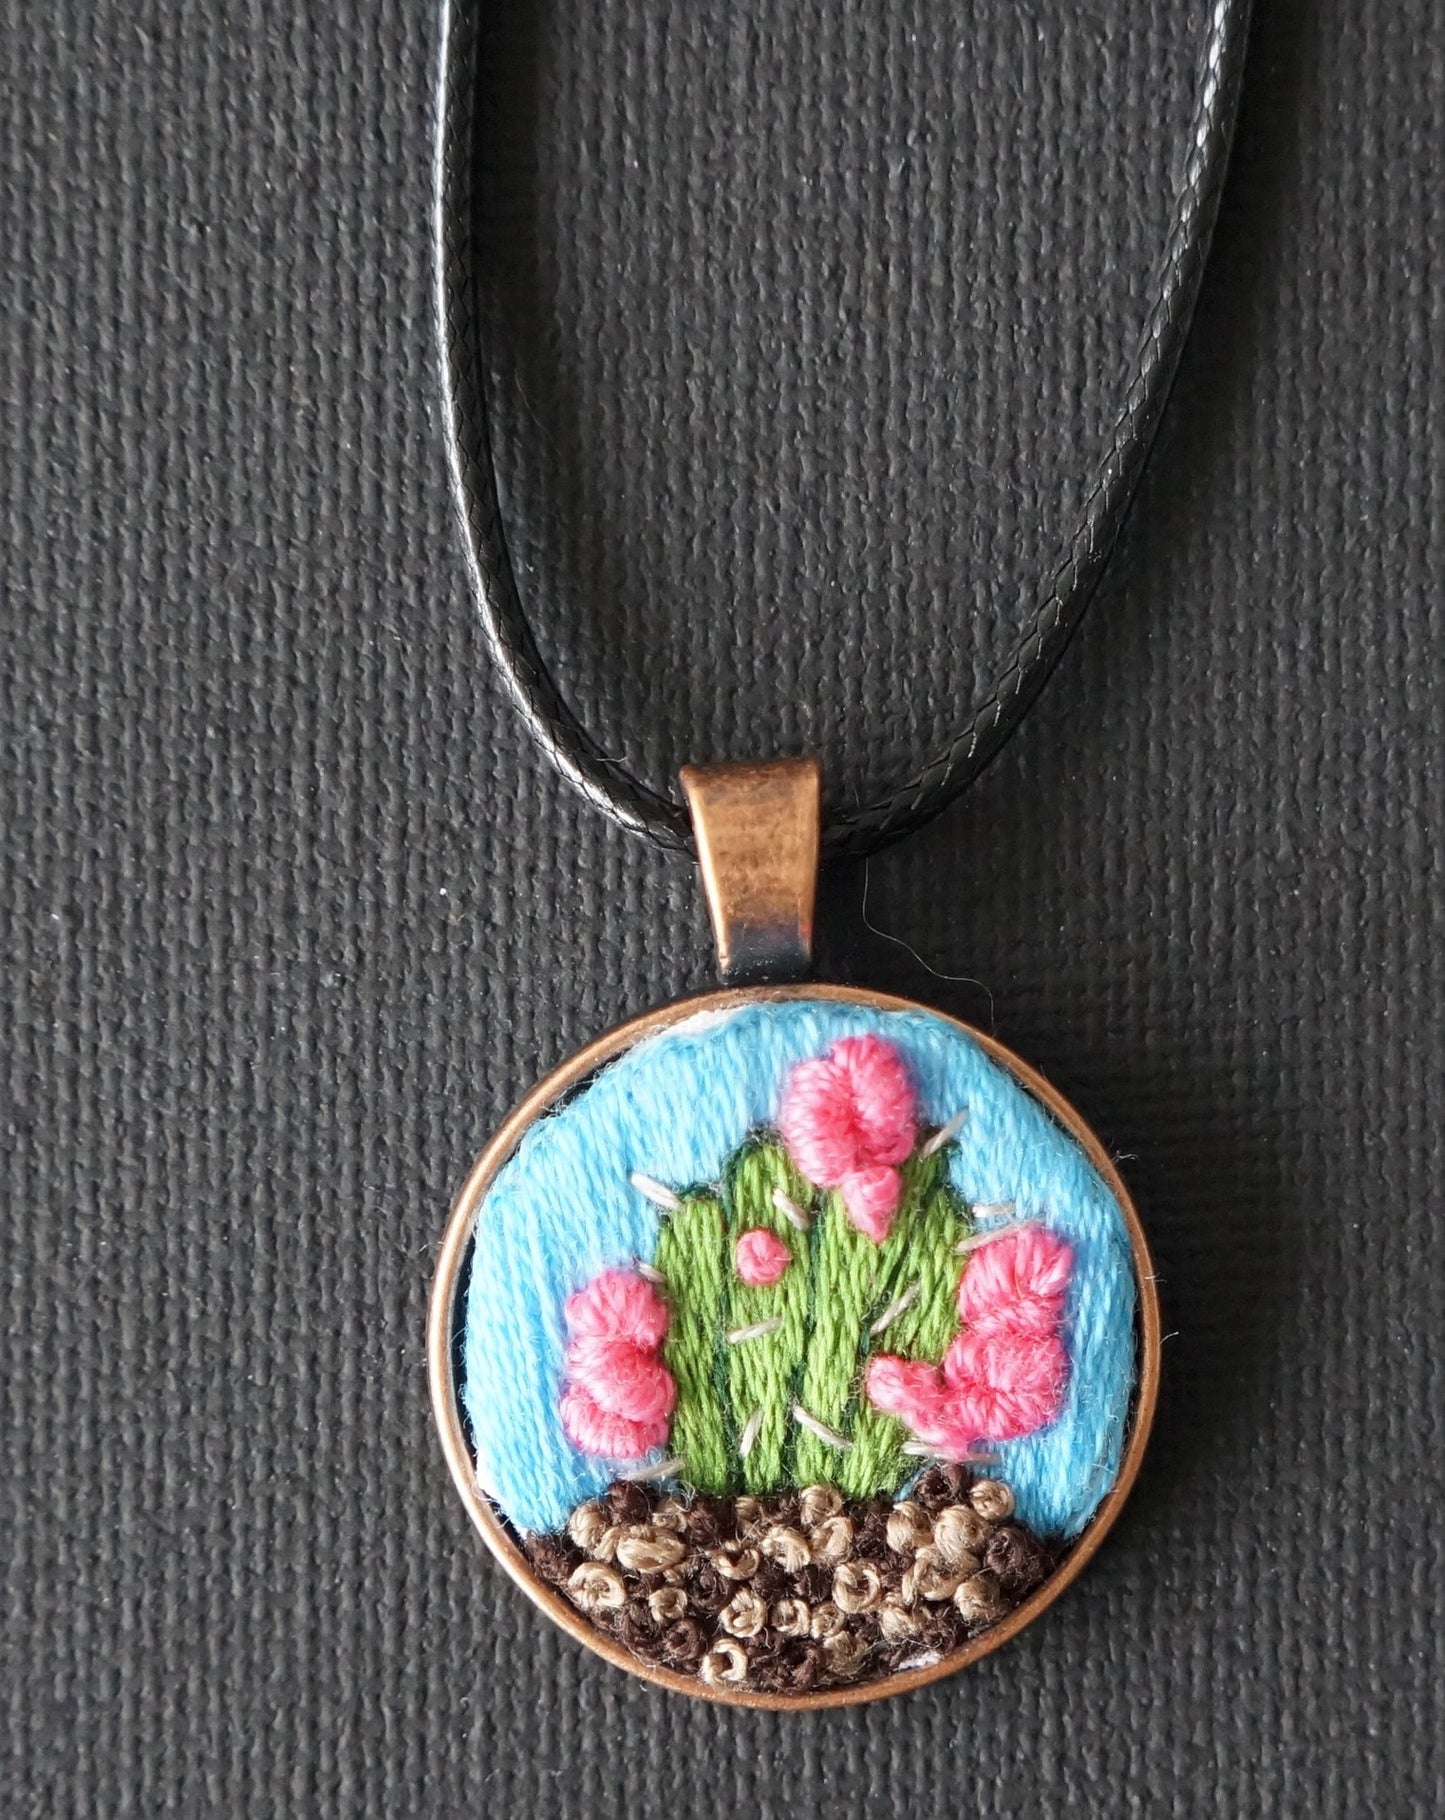 cacstus embroidered pendant with french knot textured "dirt" and french knot pink flowers